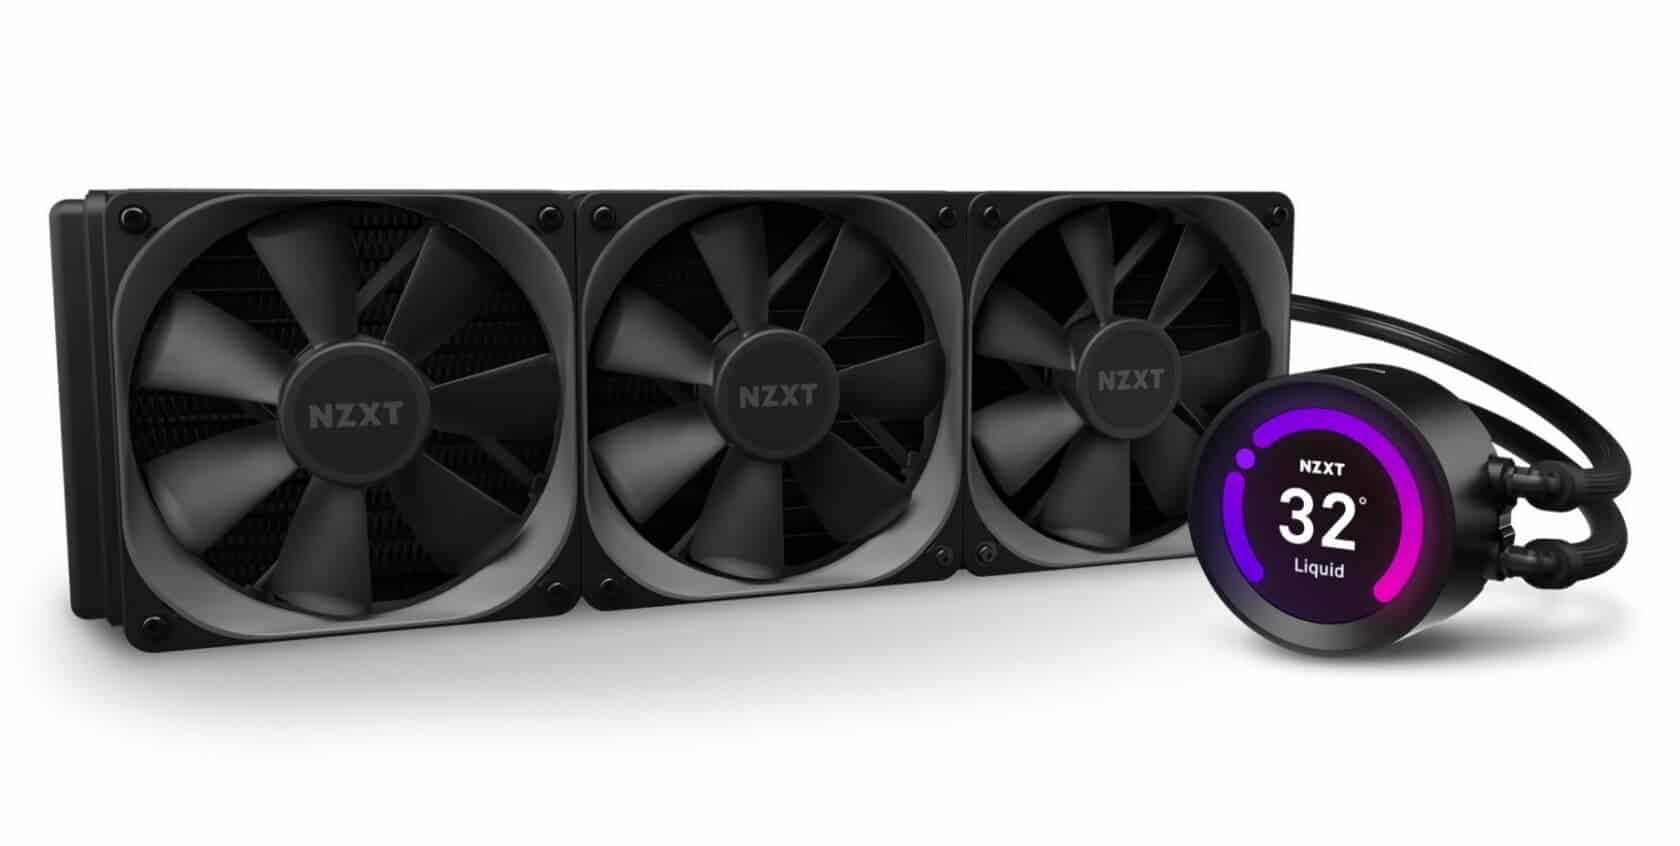 NZXT's latest AIO CPU coolers include customizable LCD screens 1